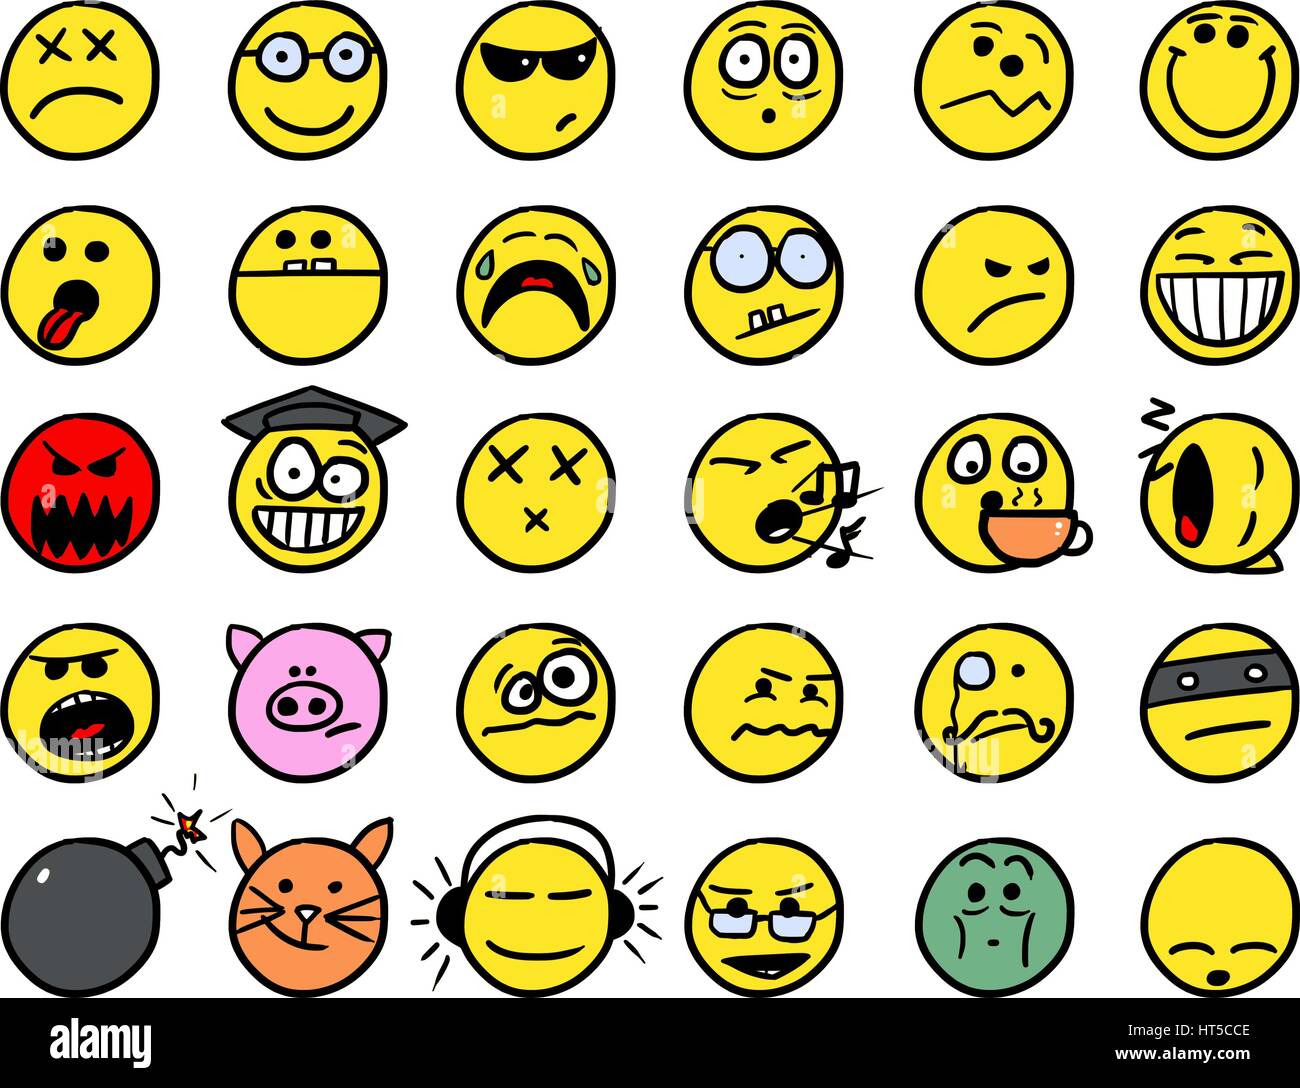 Set02 of smiley icons drawings doodles inyellow color Stock Vector